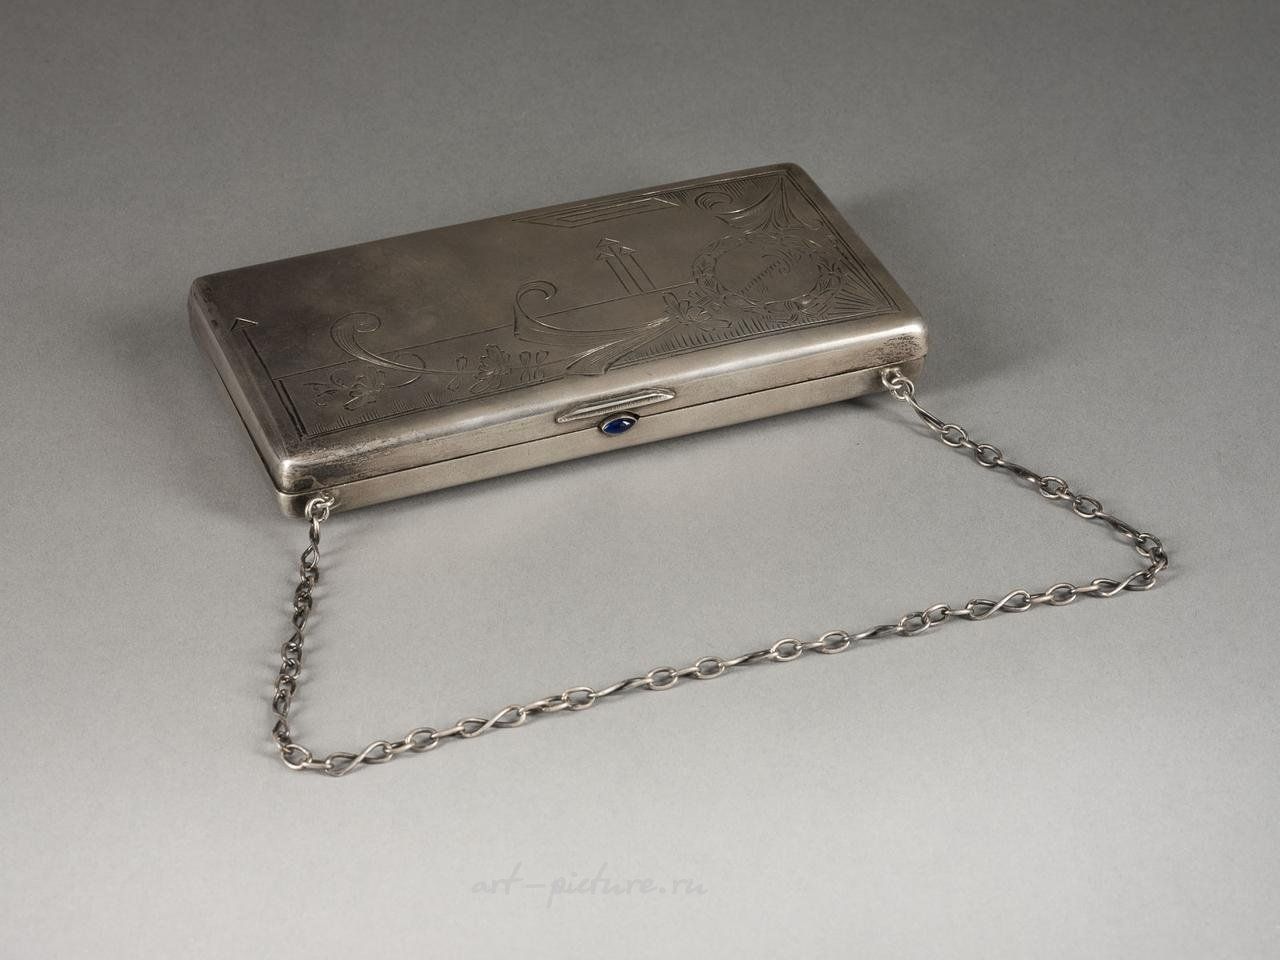 Russian silver , A SILVER LADY'S PURSE Russian, Moscow, Petr Petrovitch P